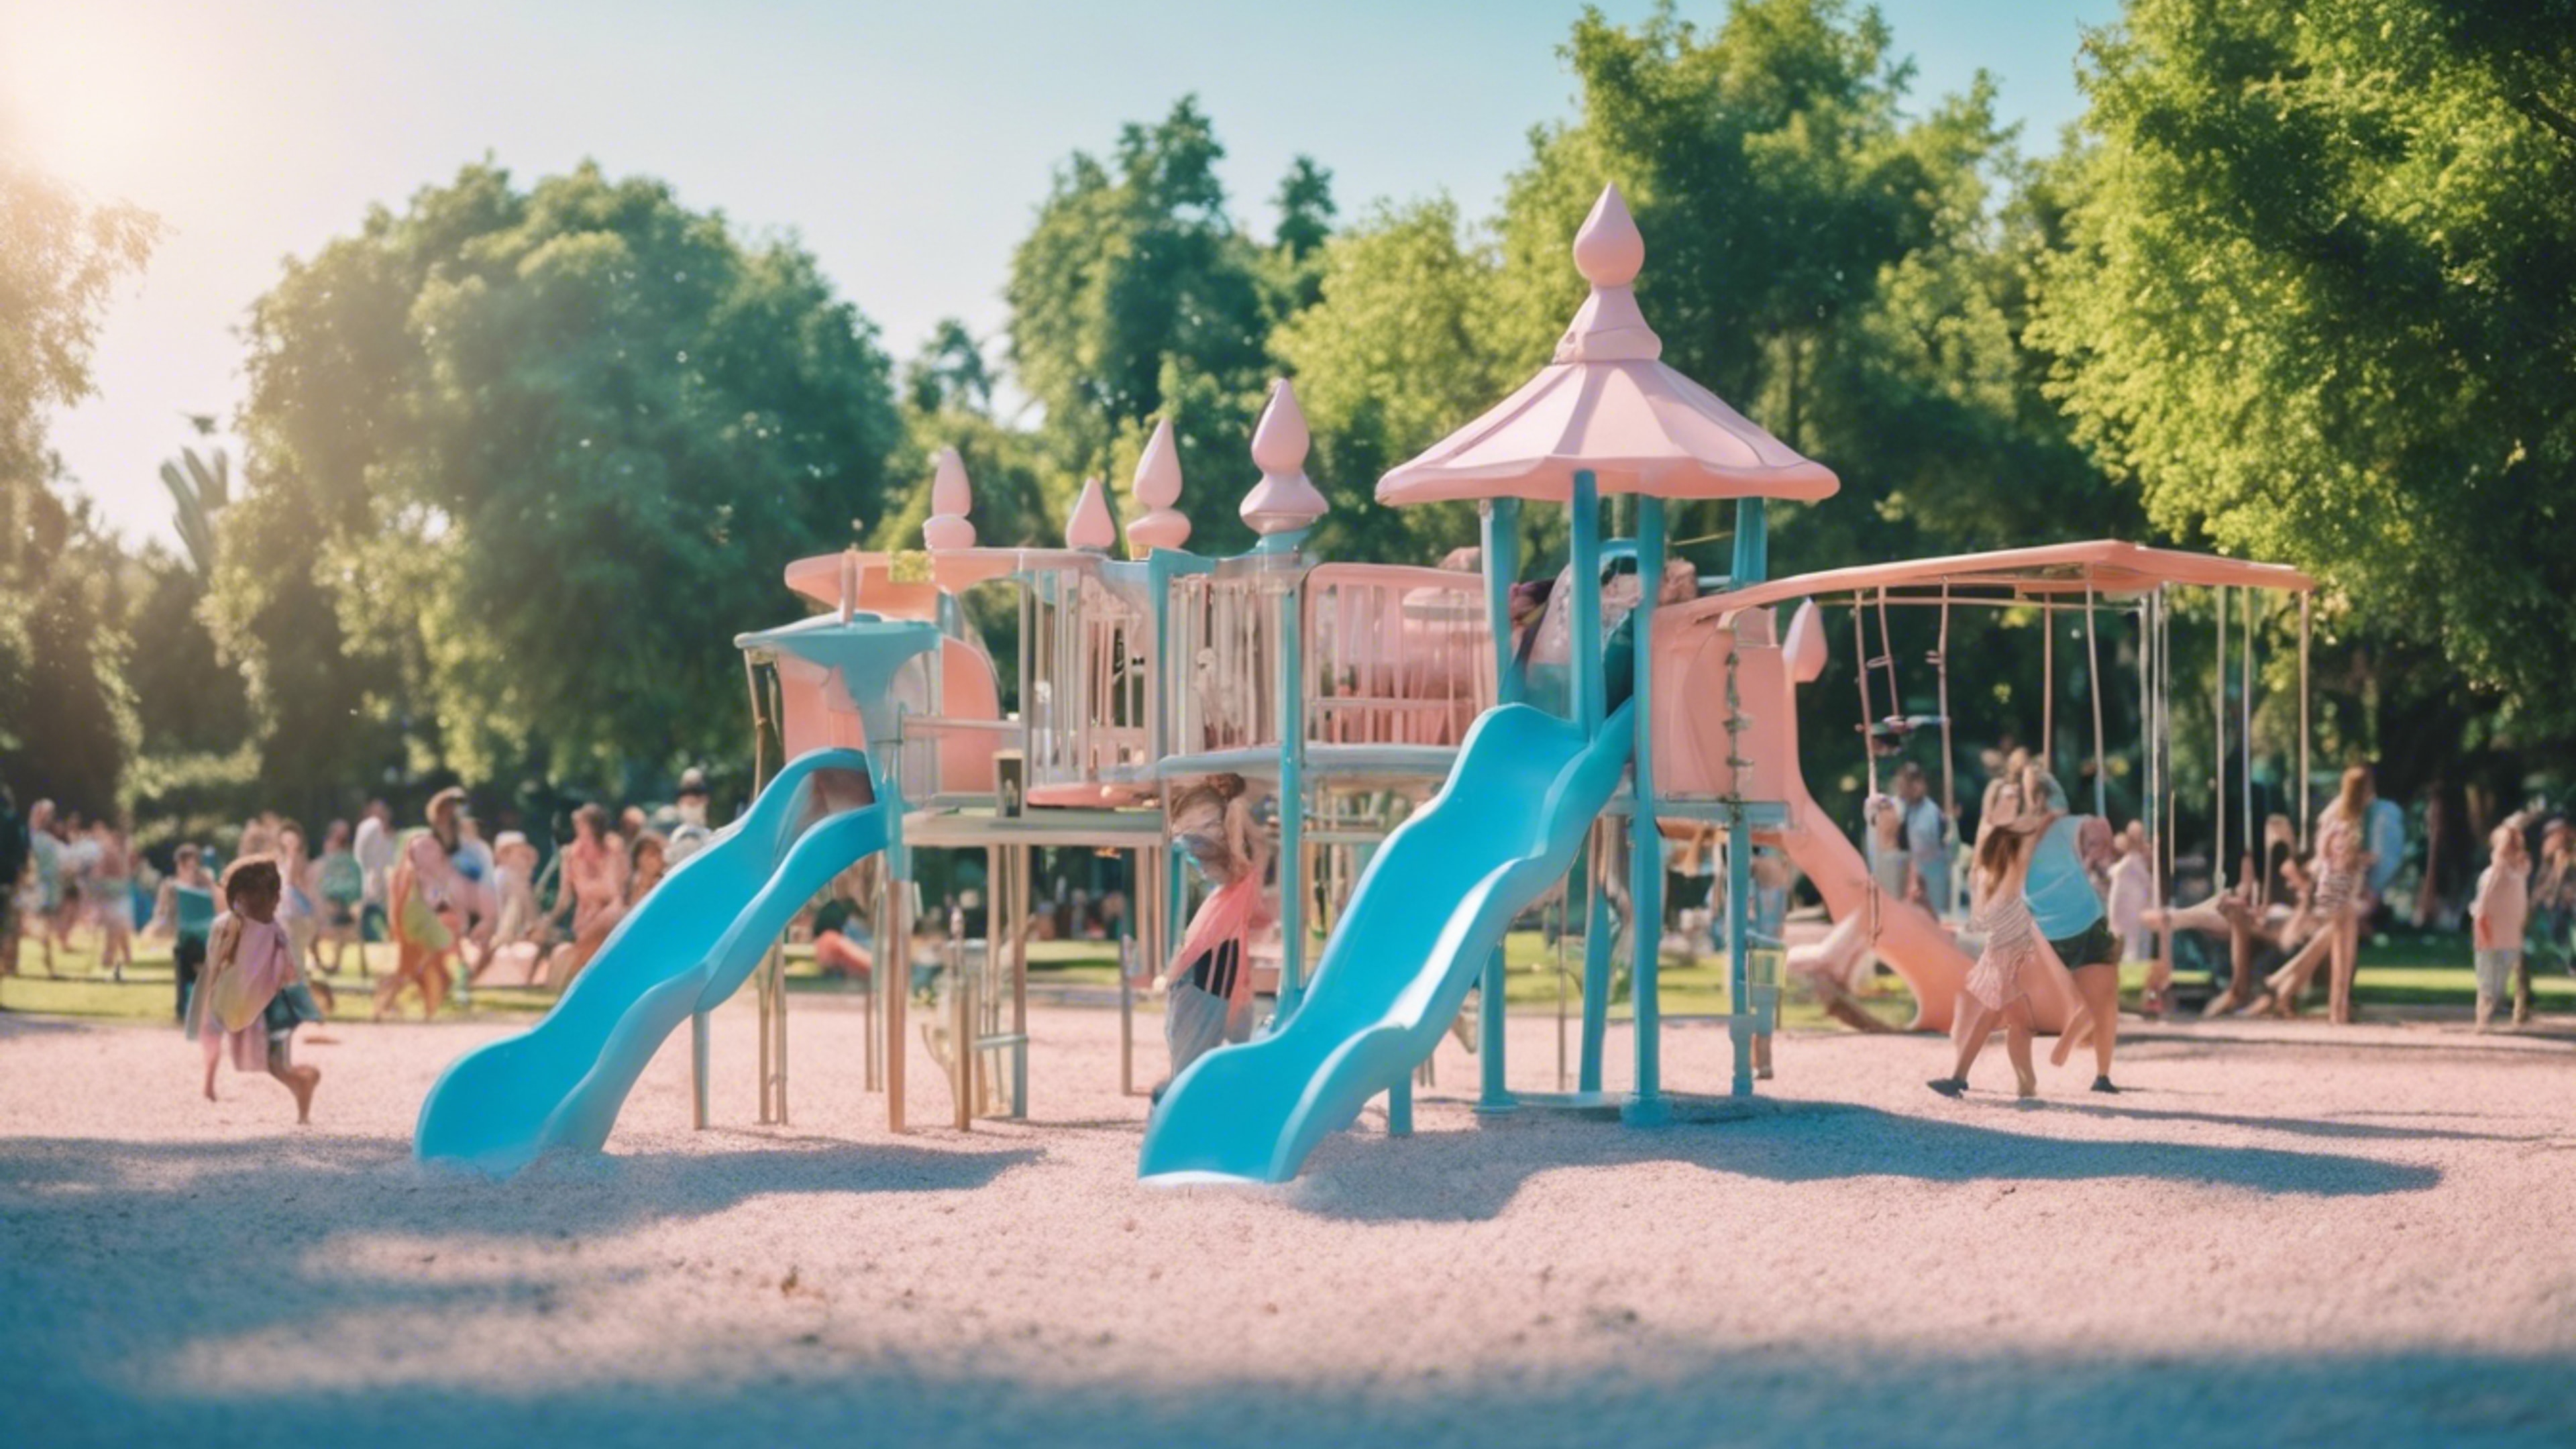 A bright pastel blue playground in a lively public park, bustling with kids. ផ្ទាំង​រូបភាព[d7bf1102c17e4700a3c3]